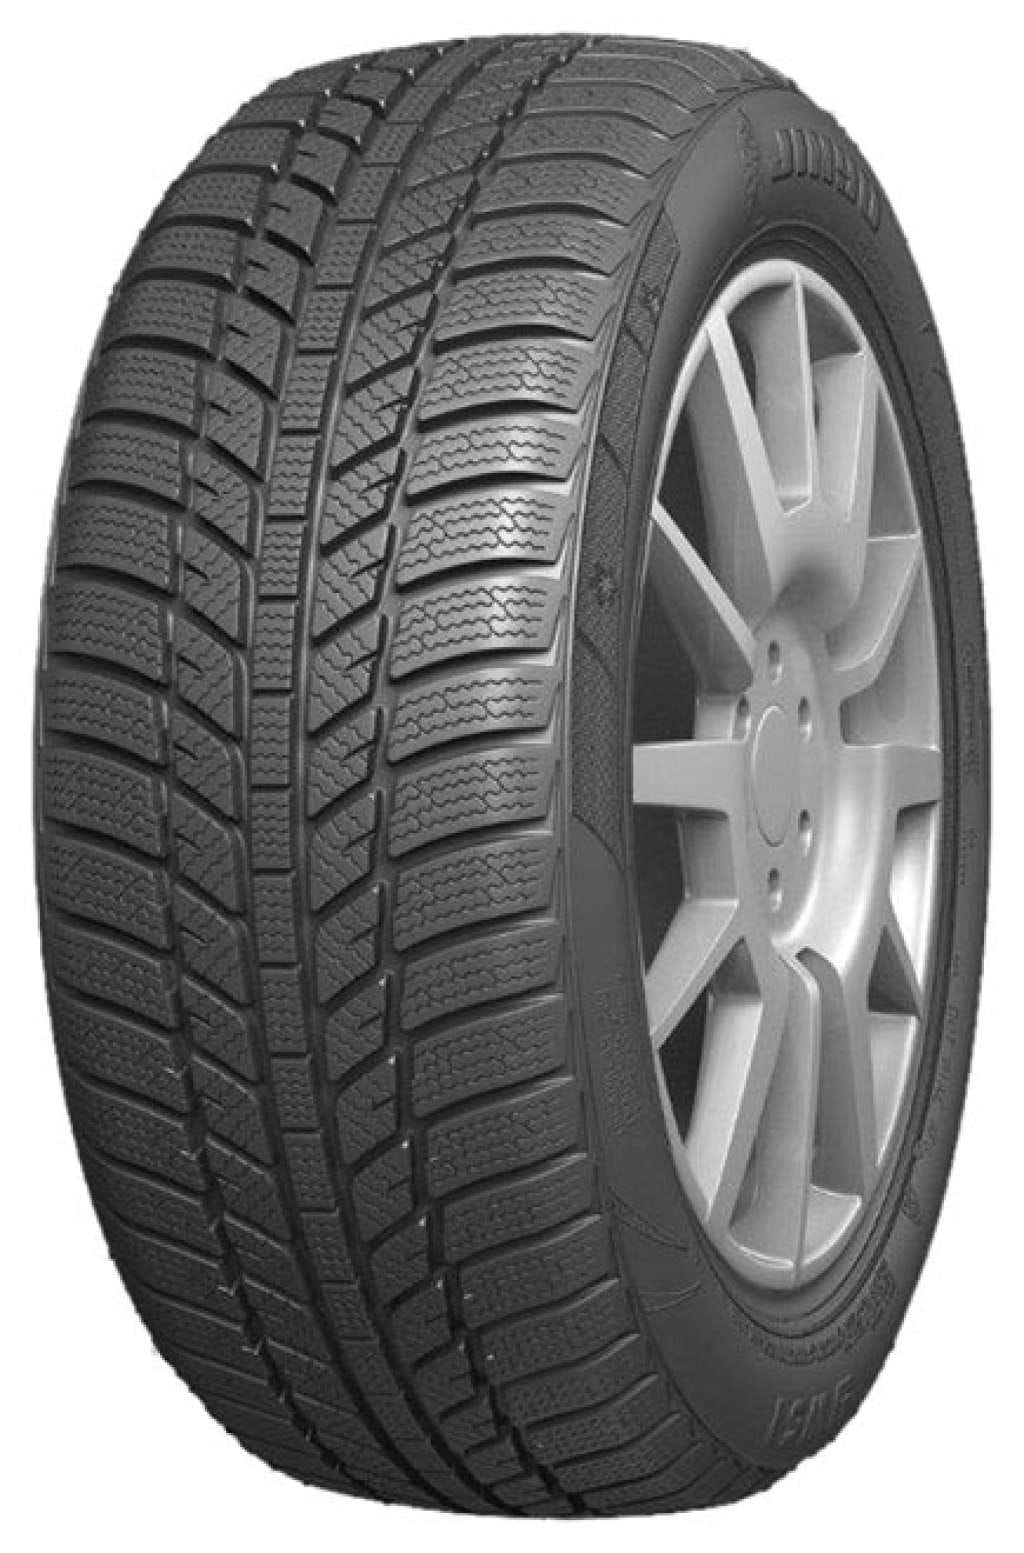 Gomme Nuove Jinyu Tyres 175/70 R13 82T Winter YW51 Radial M+S pneumatici nuovi Invernale